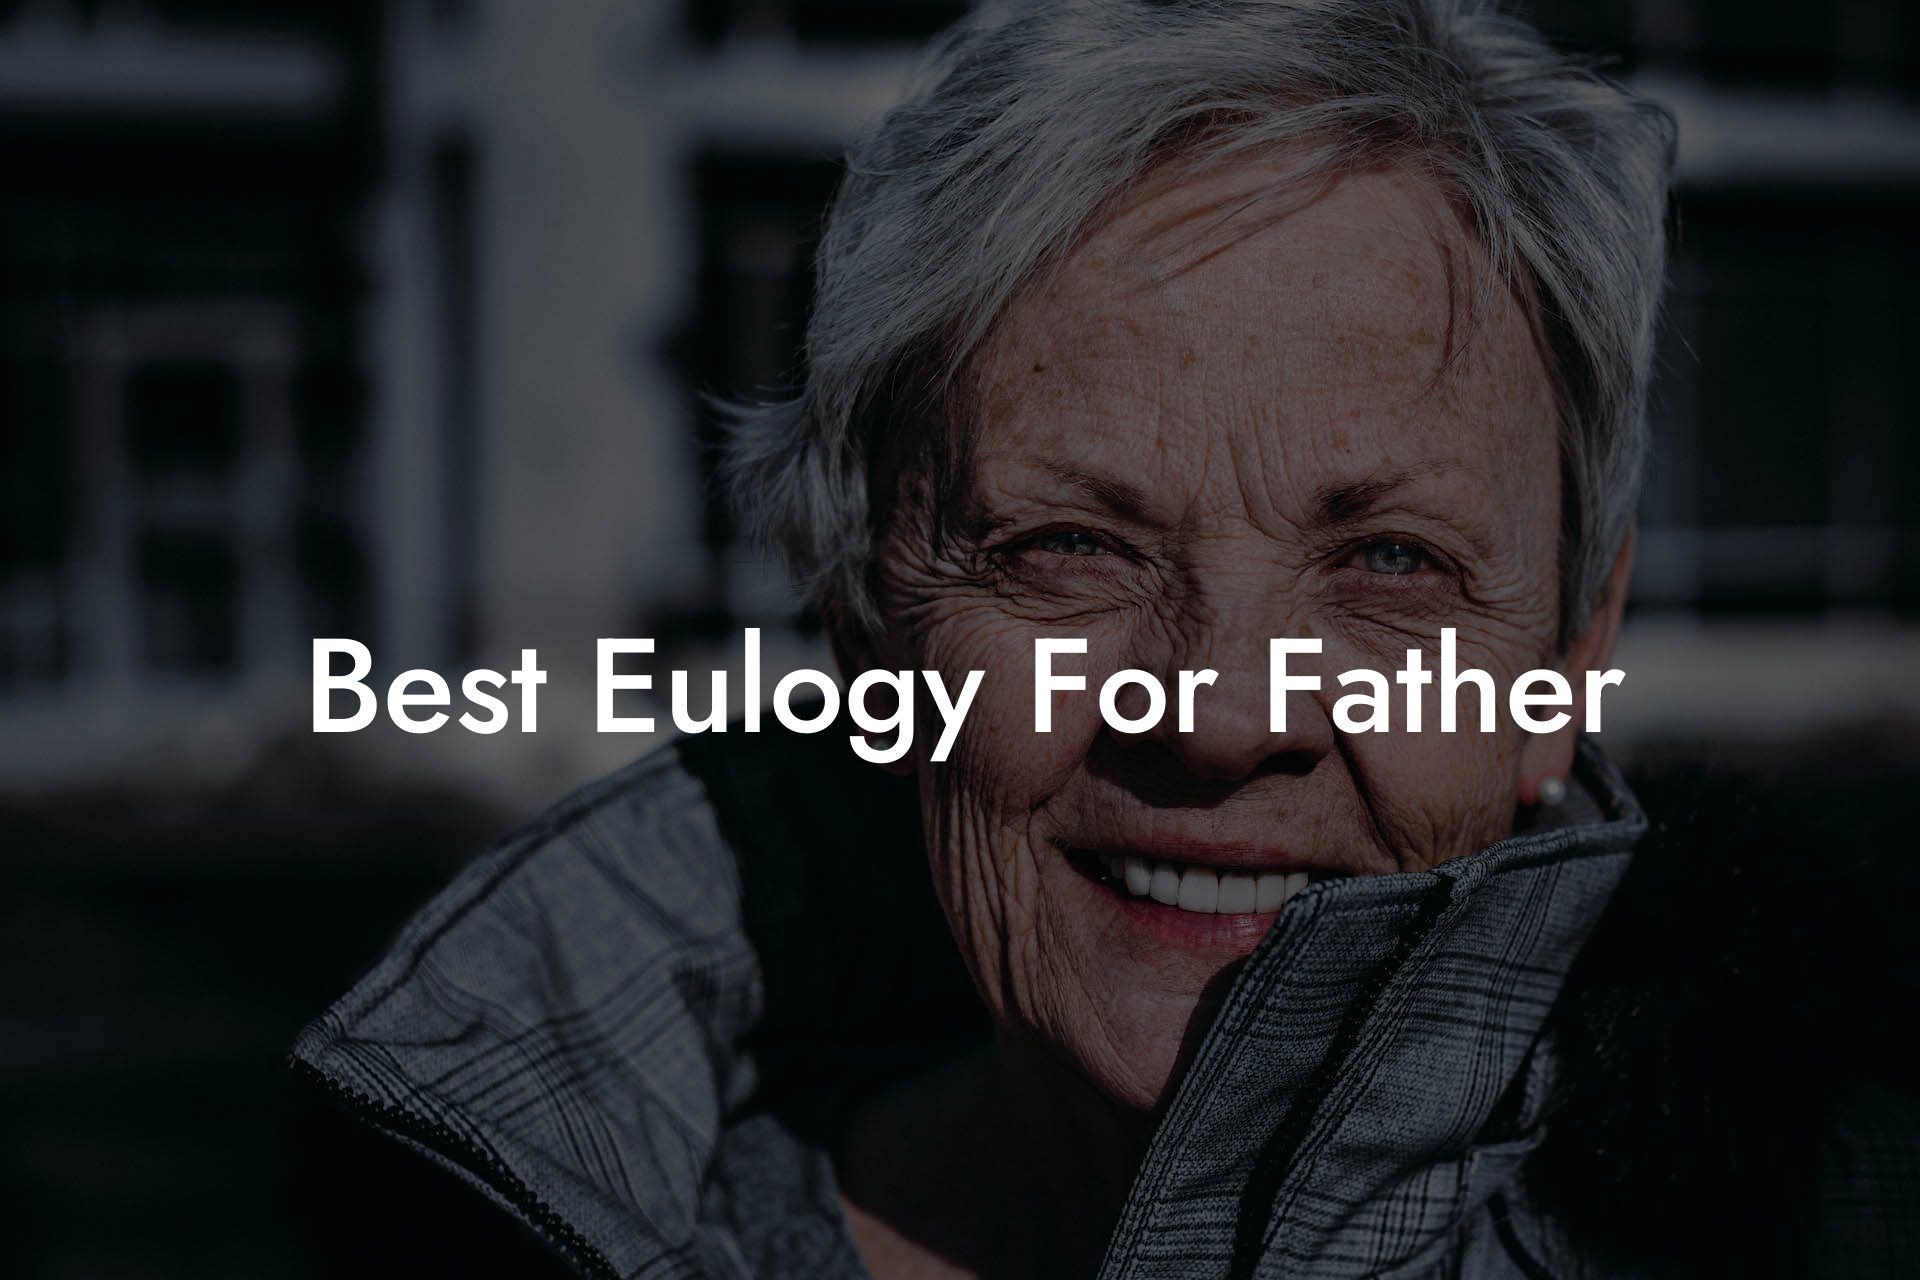 Best Eulogy For Father